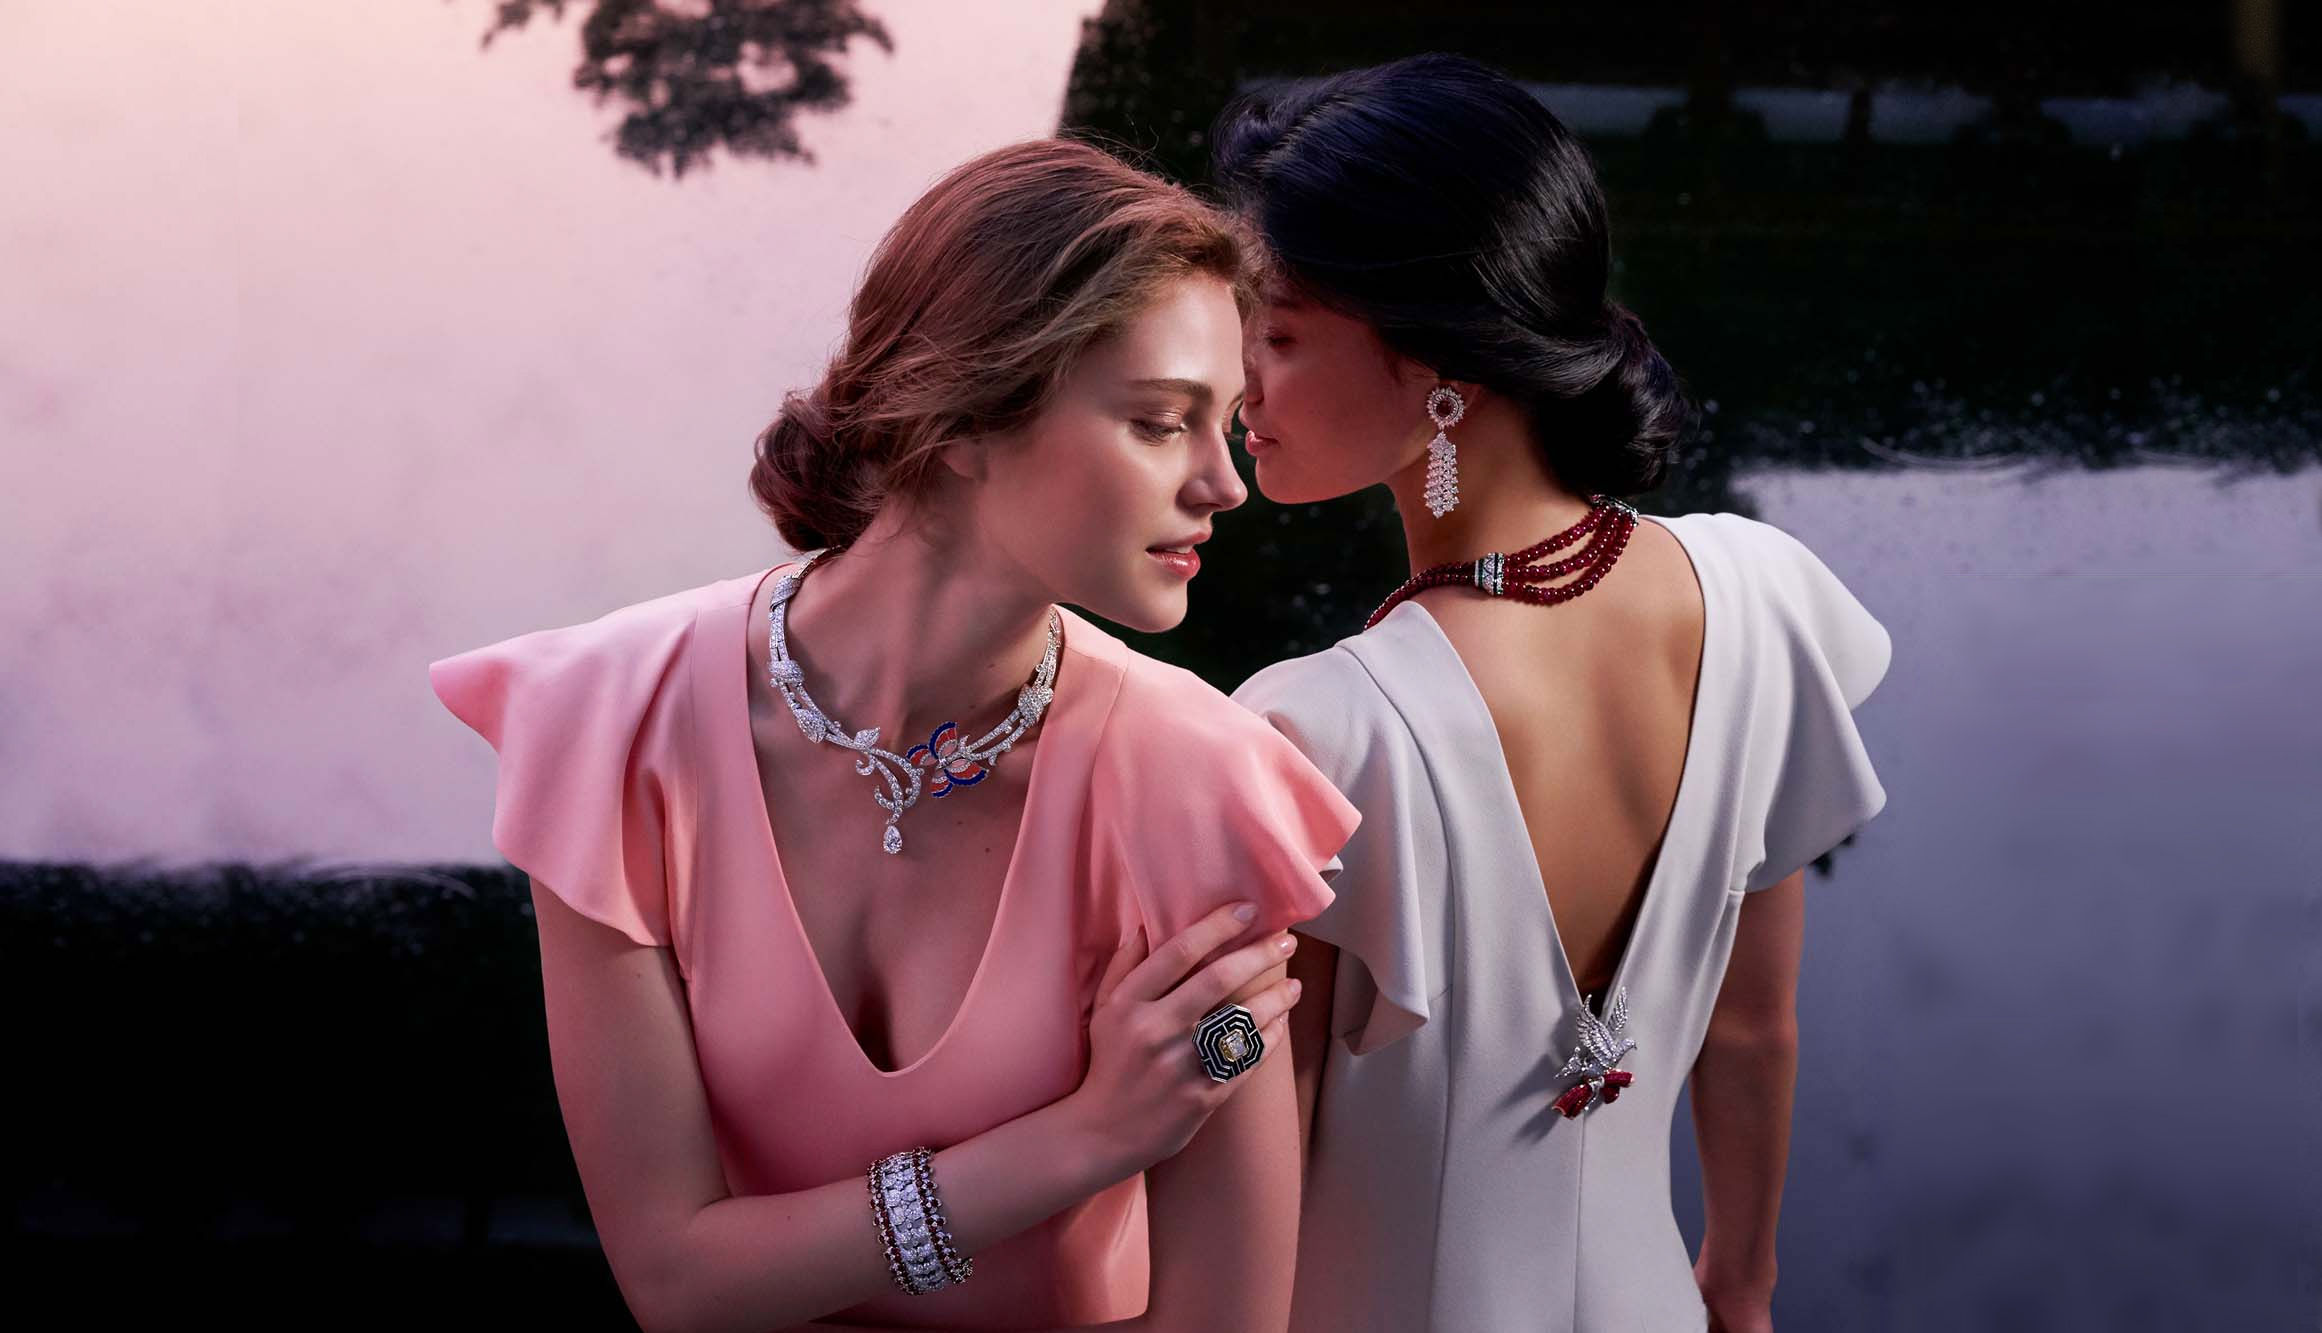 How Van Cleef & Arpels made high jewellery out of the humble zip